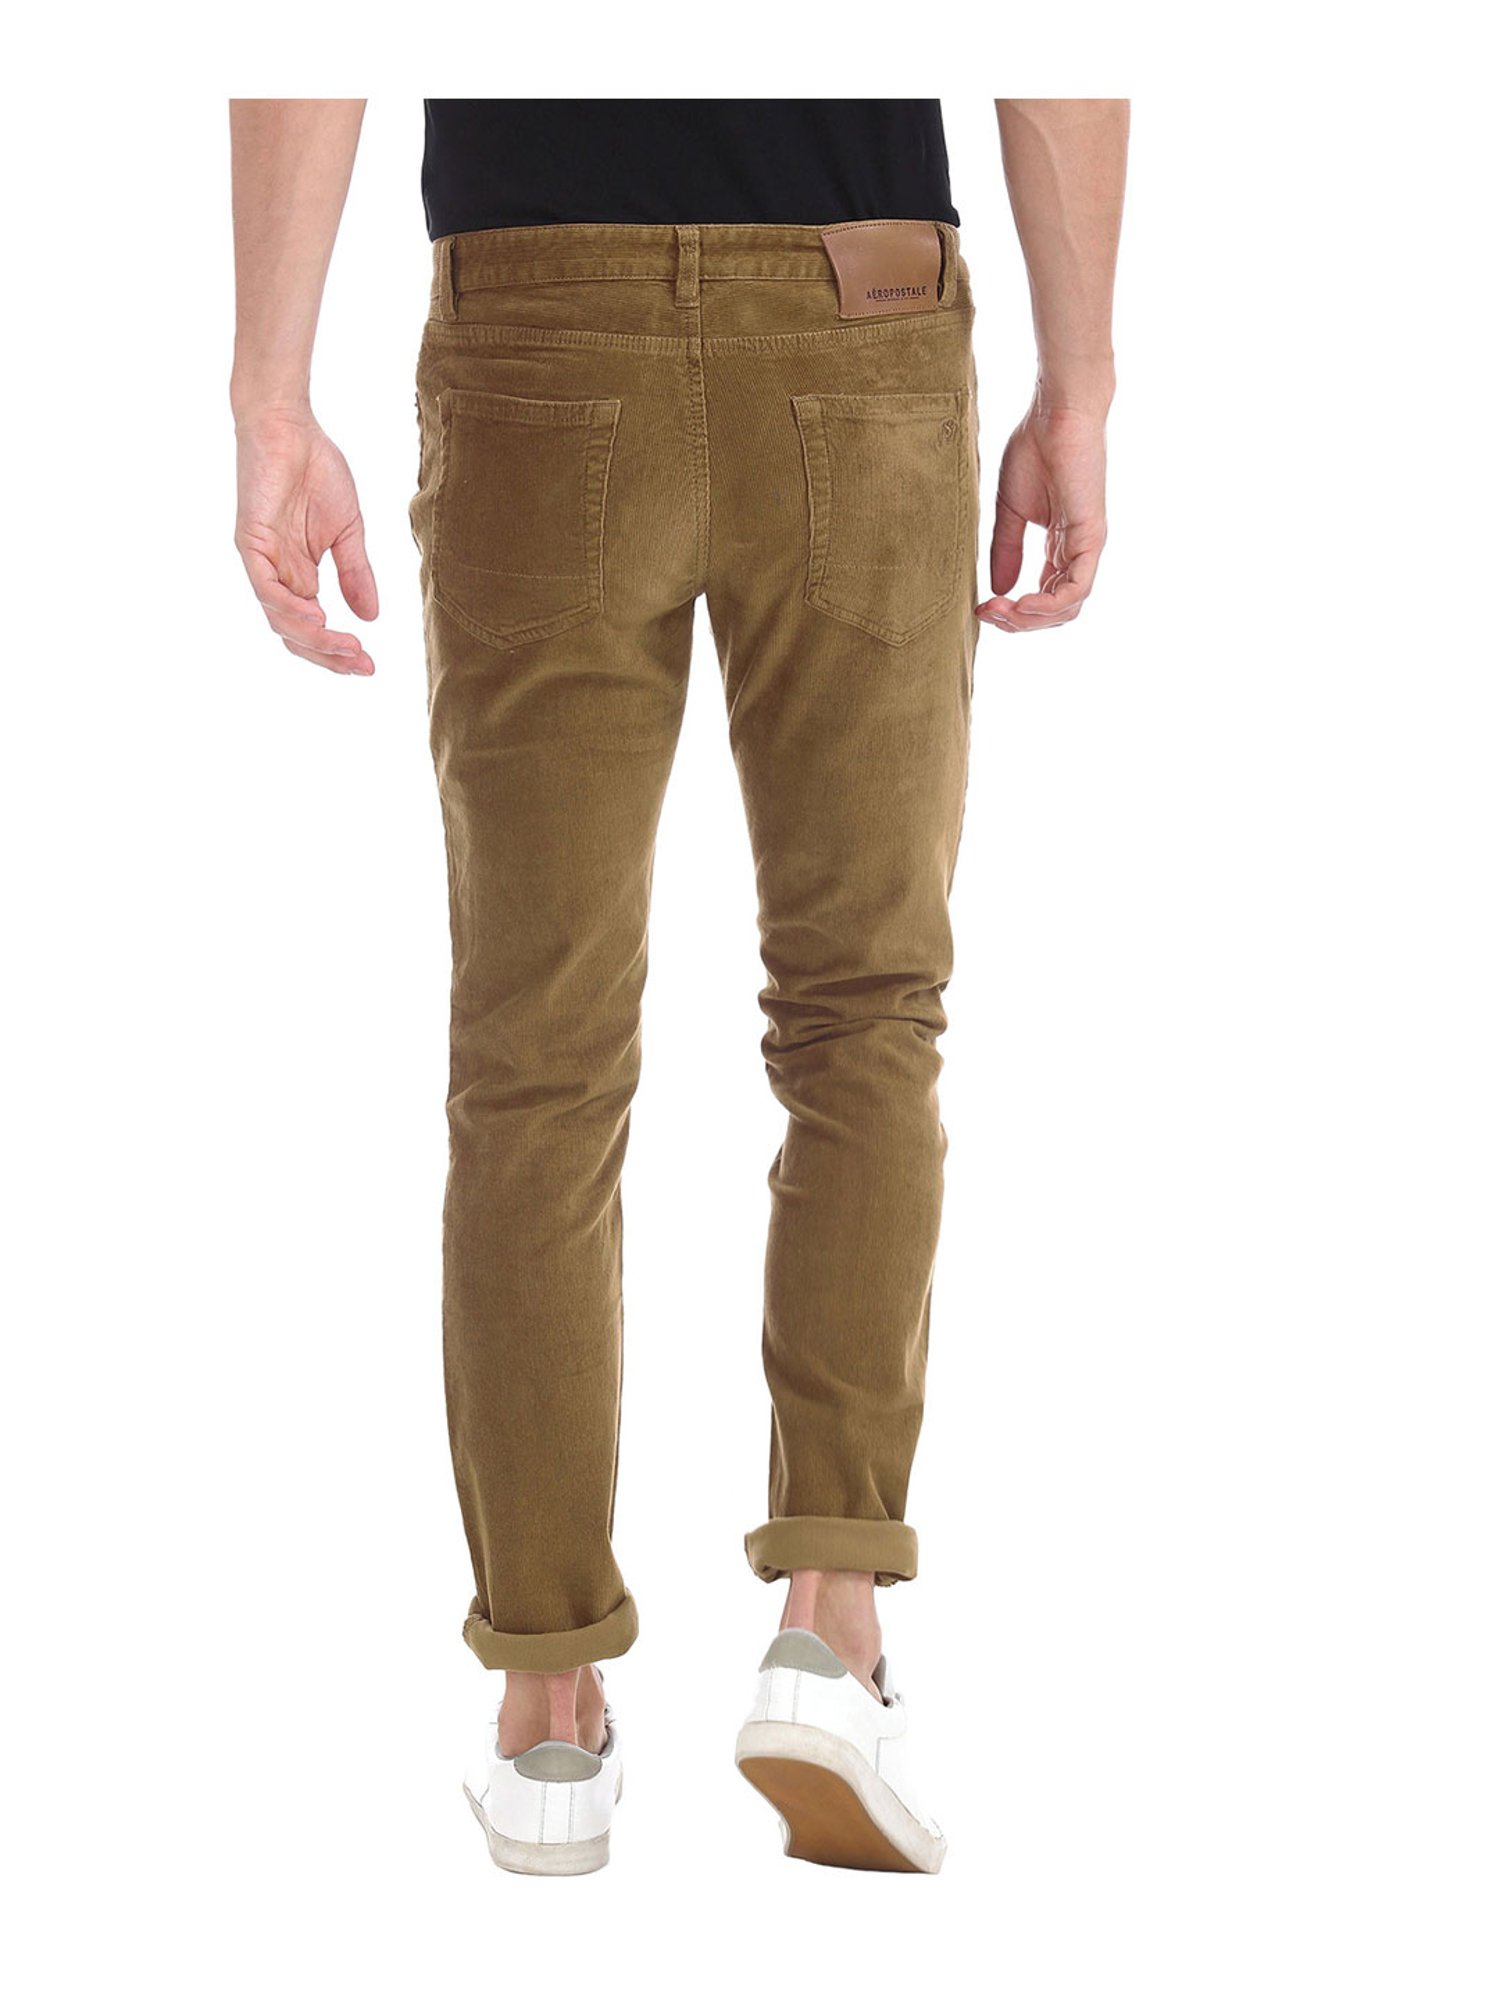 Bound Brown Cord Trouser  The Ragged Priest